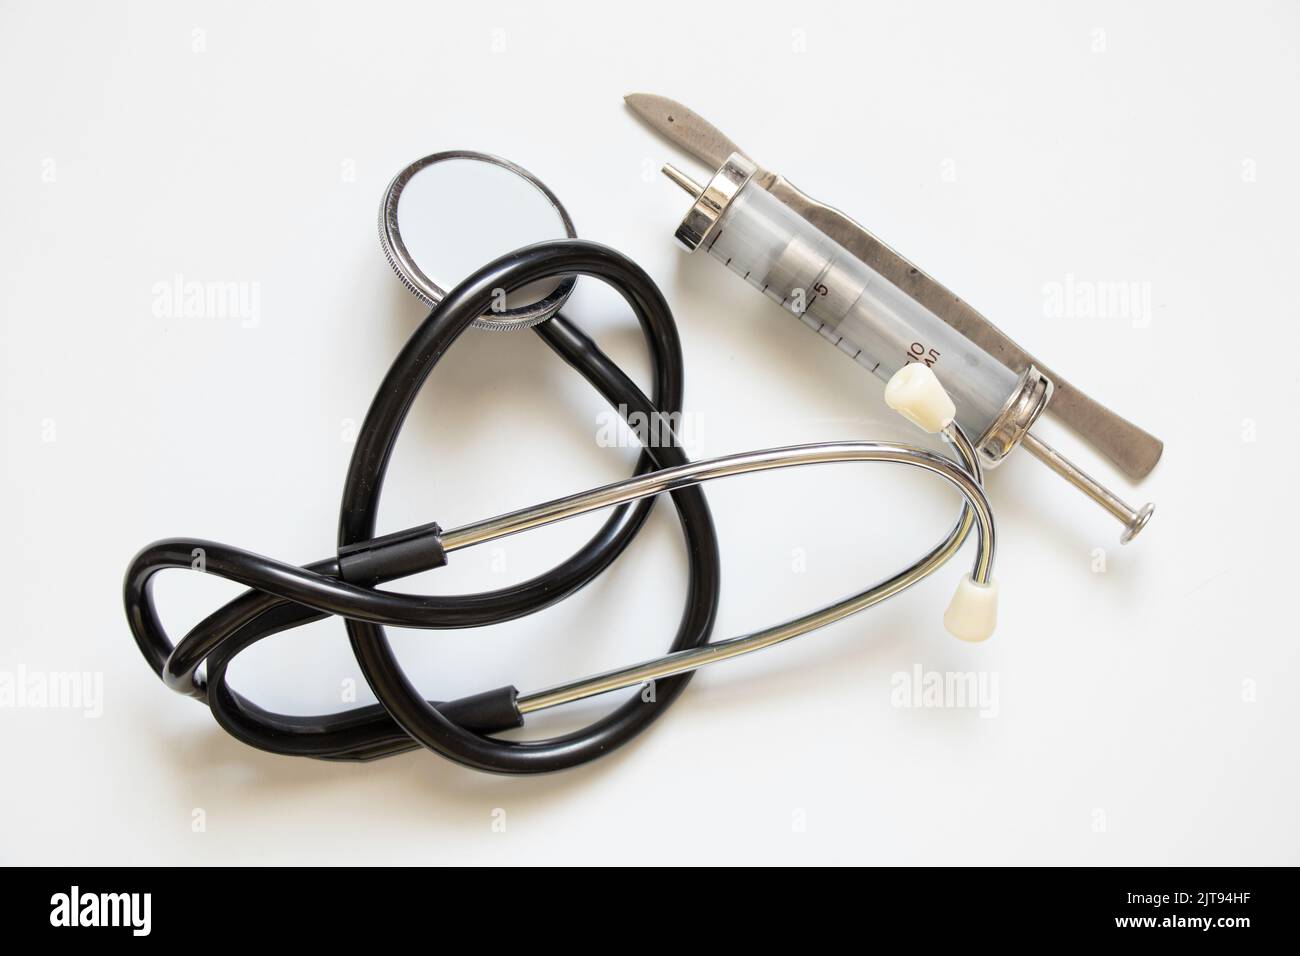 Stethoscope old syringe and scalpel lie on a white background ,medical instruments close-up Stock Photo